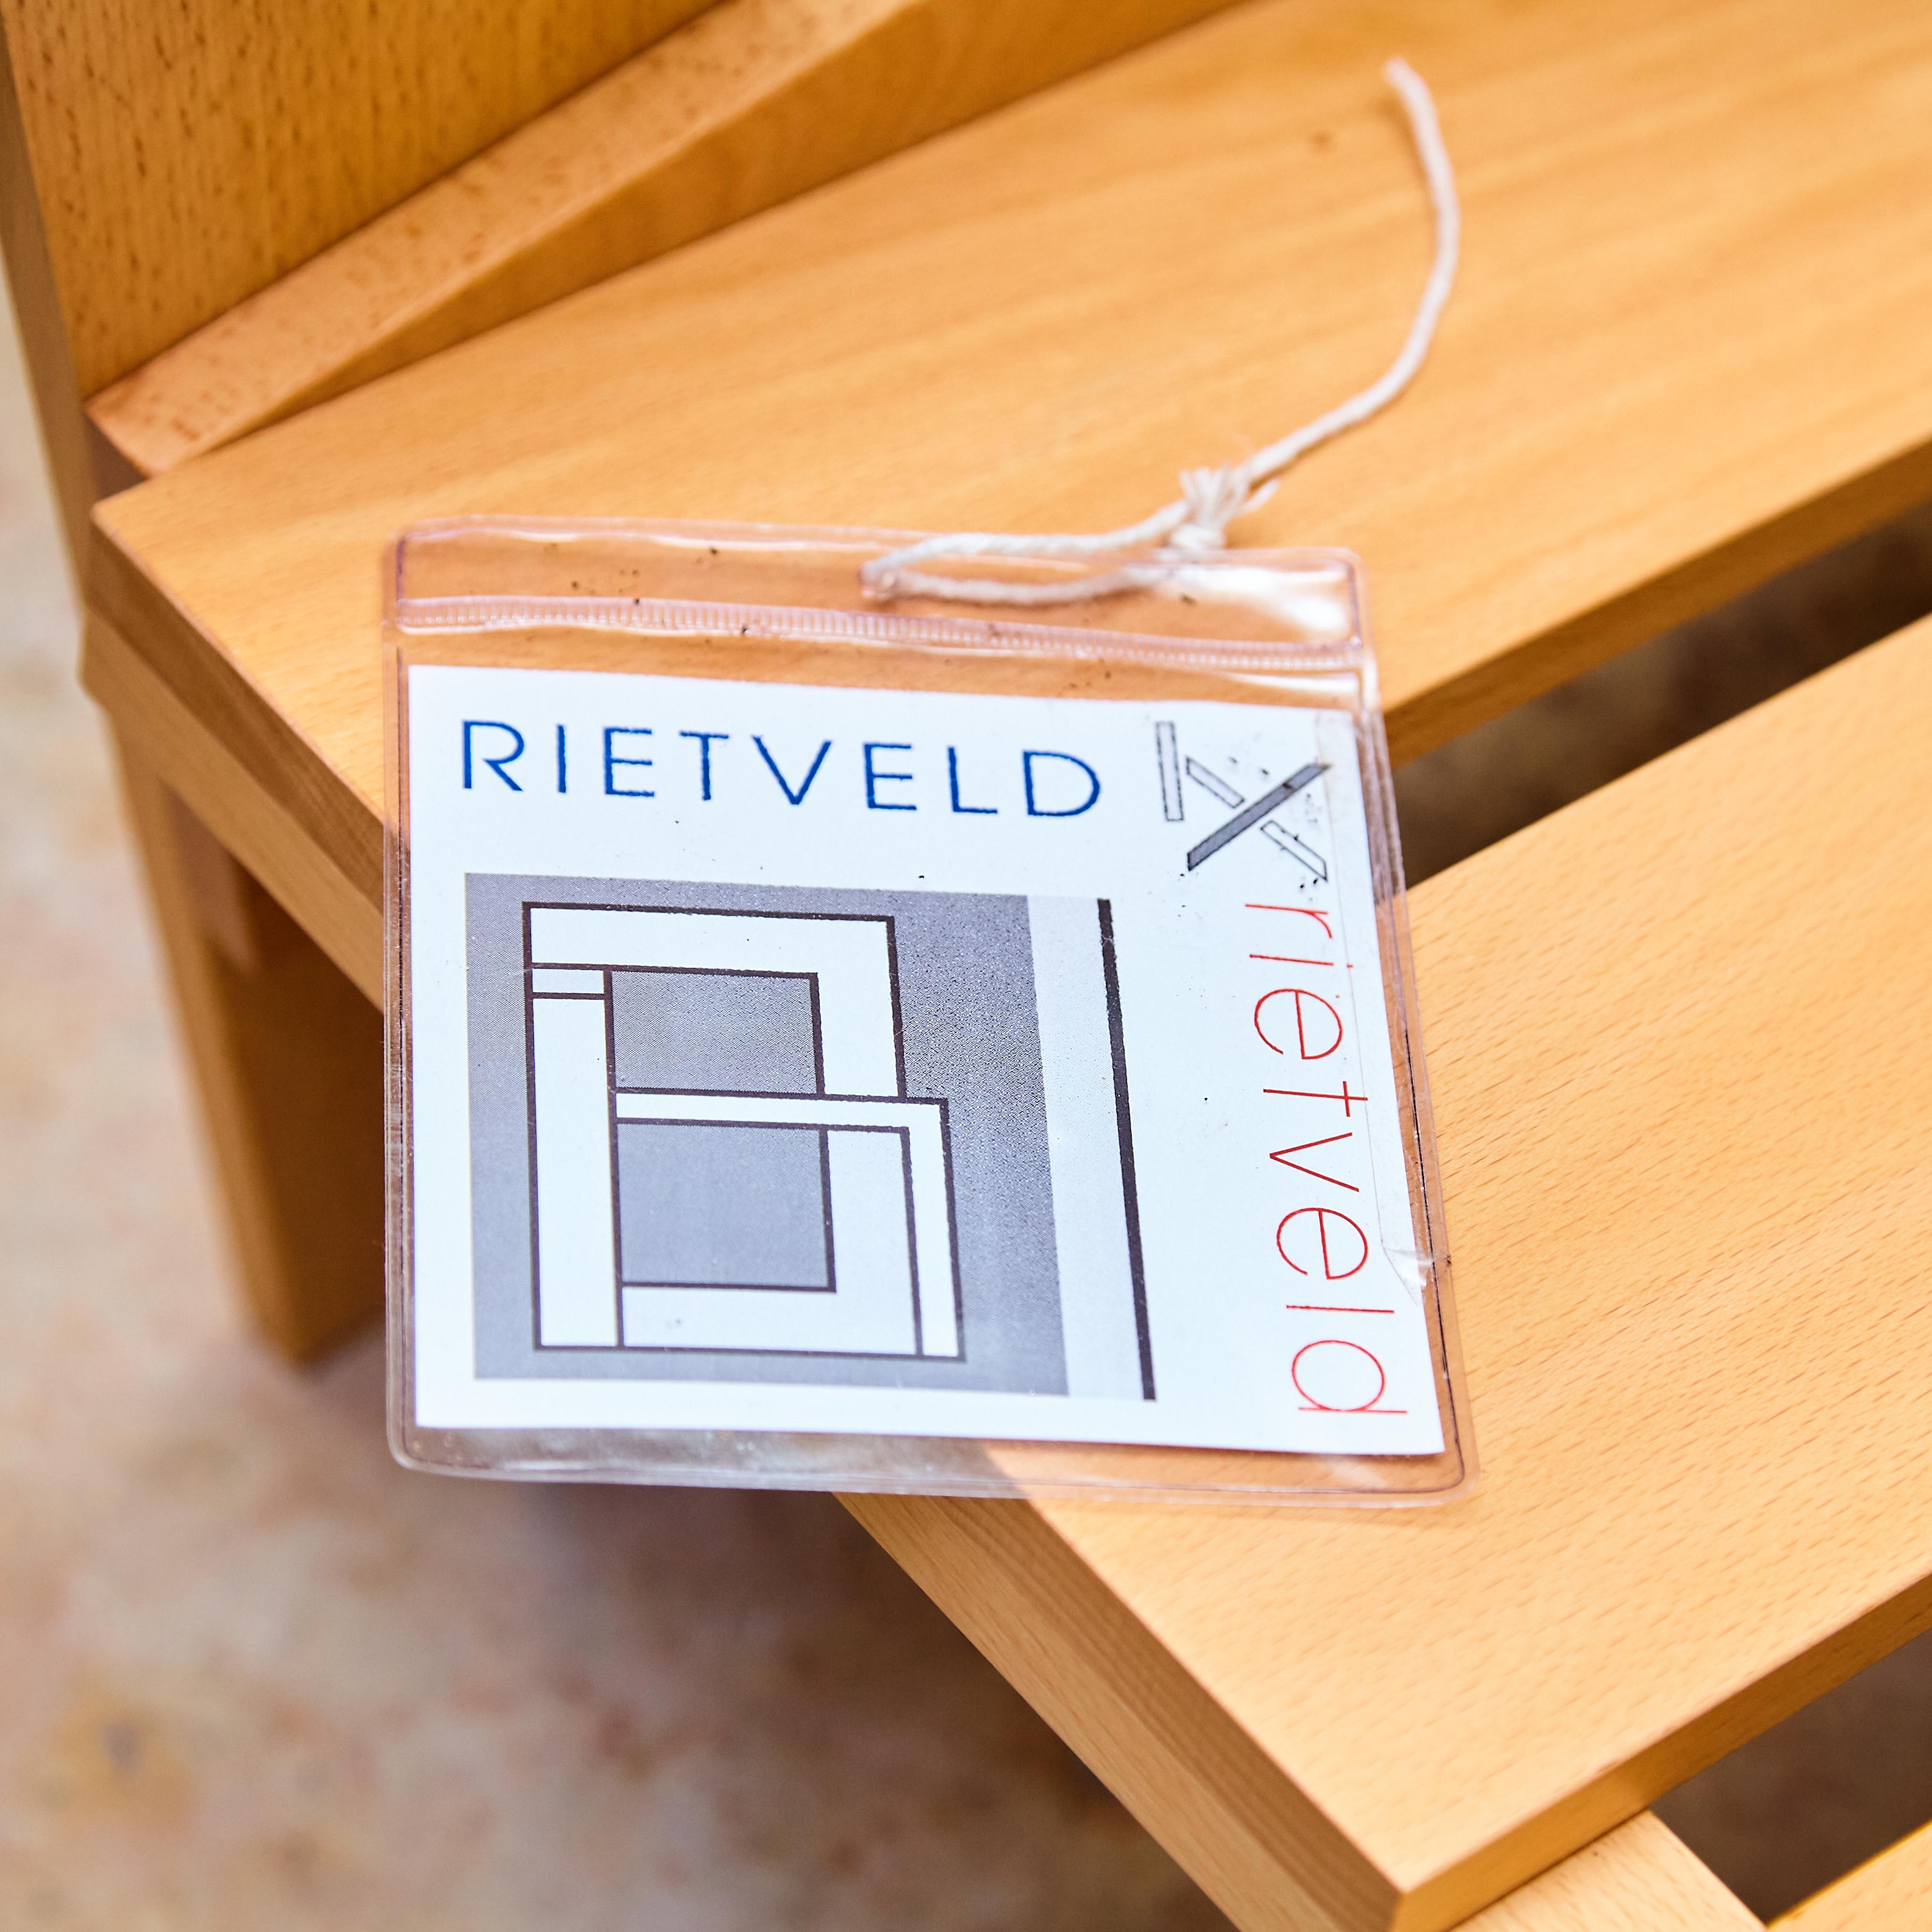 Gerrit Rietveld Wood Child Armchair 'Crate' by Rietveld by Rietveld, circa 2005 For Sale 11